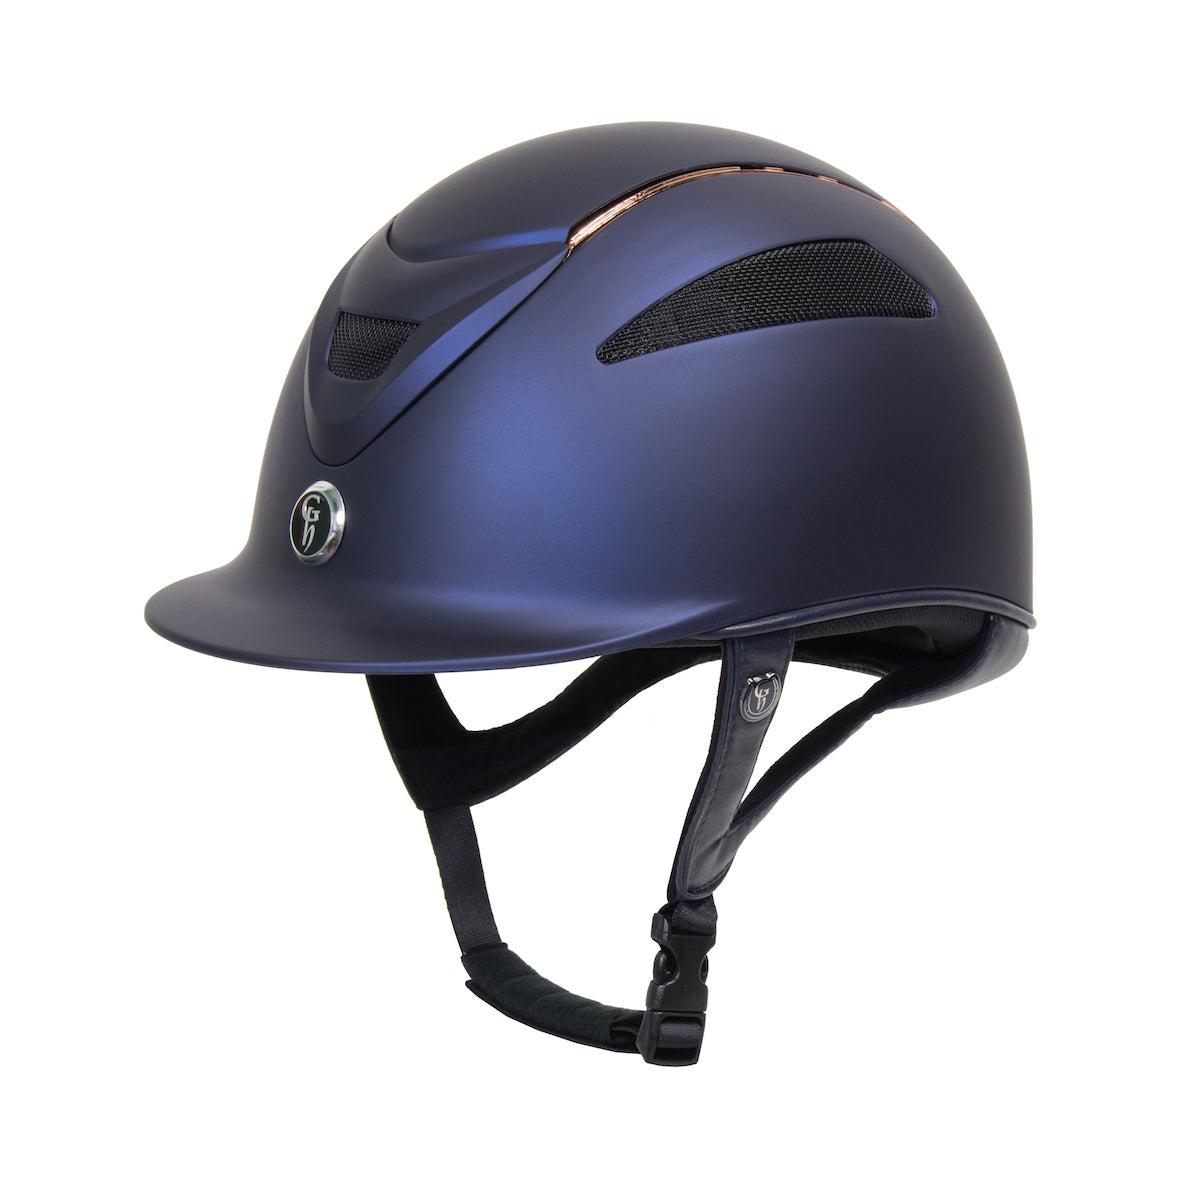 GH Conquest MKII - Riding Hat - Navy/Rose Gold Limited Edition 